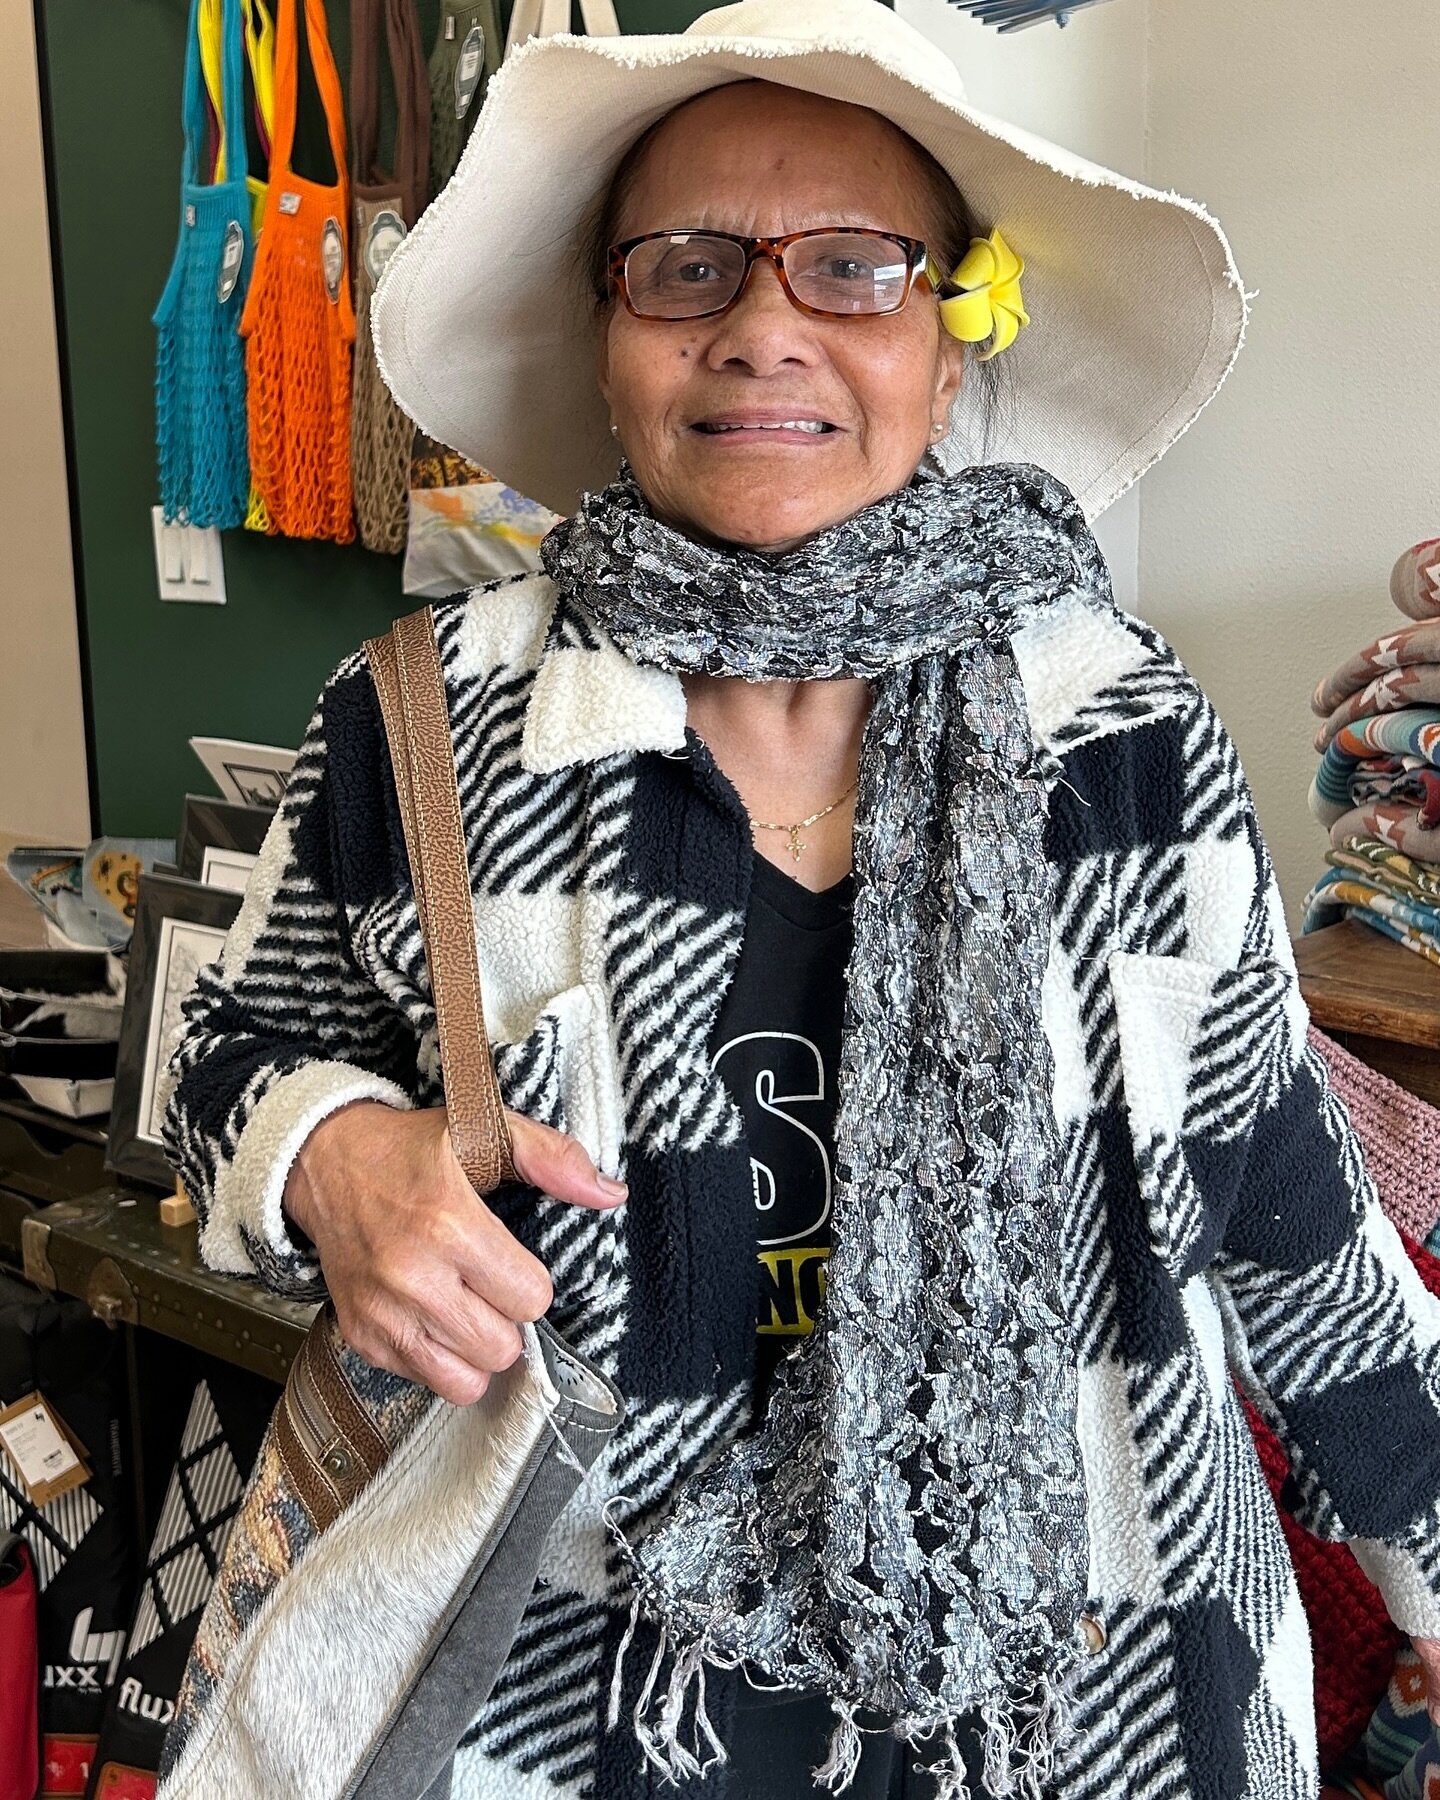 Being a retailer.
This lady from Yucca Valley entered our store at 9:30AM. With joy, she selected a bag and adorned herself with a Desert Hat. &ldquo;I&rsquo;ll be the Beauty Queen at church next Sunday, and my bag will be the perfect companion for m